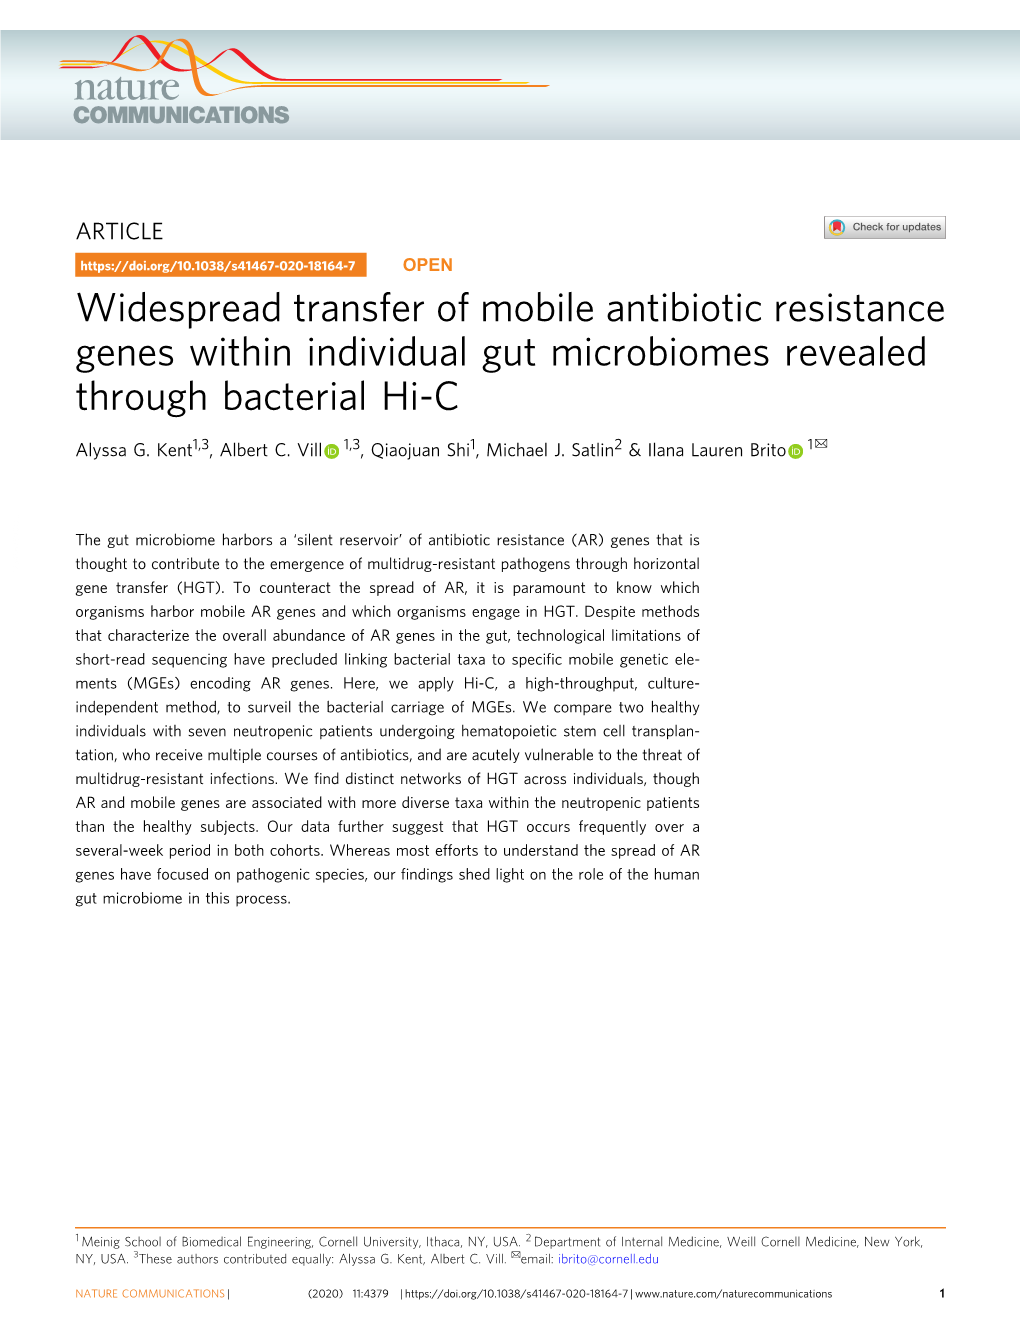 Widespread Transfer of Mobile Antibiotic Resistance Genes Within Individual Gut Microbiomes Revealed Through Bacterial Hi-C ✉ Alyssa G